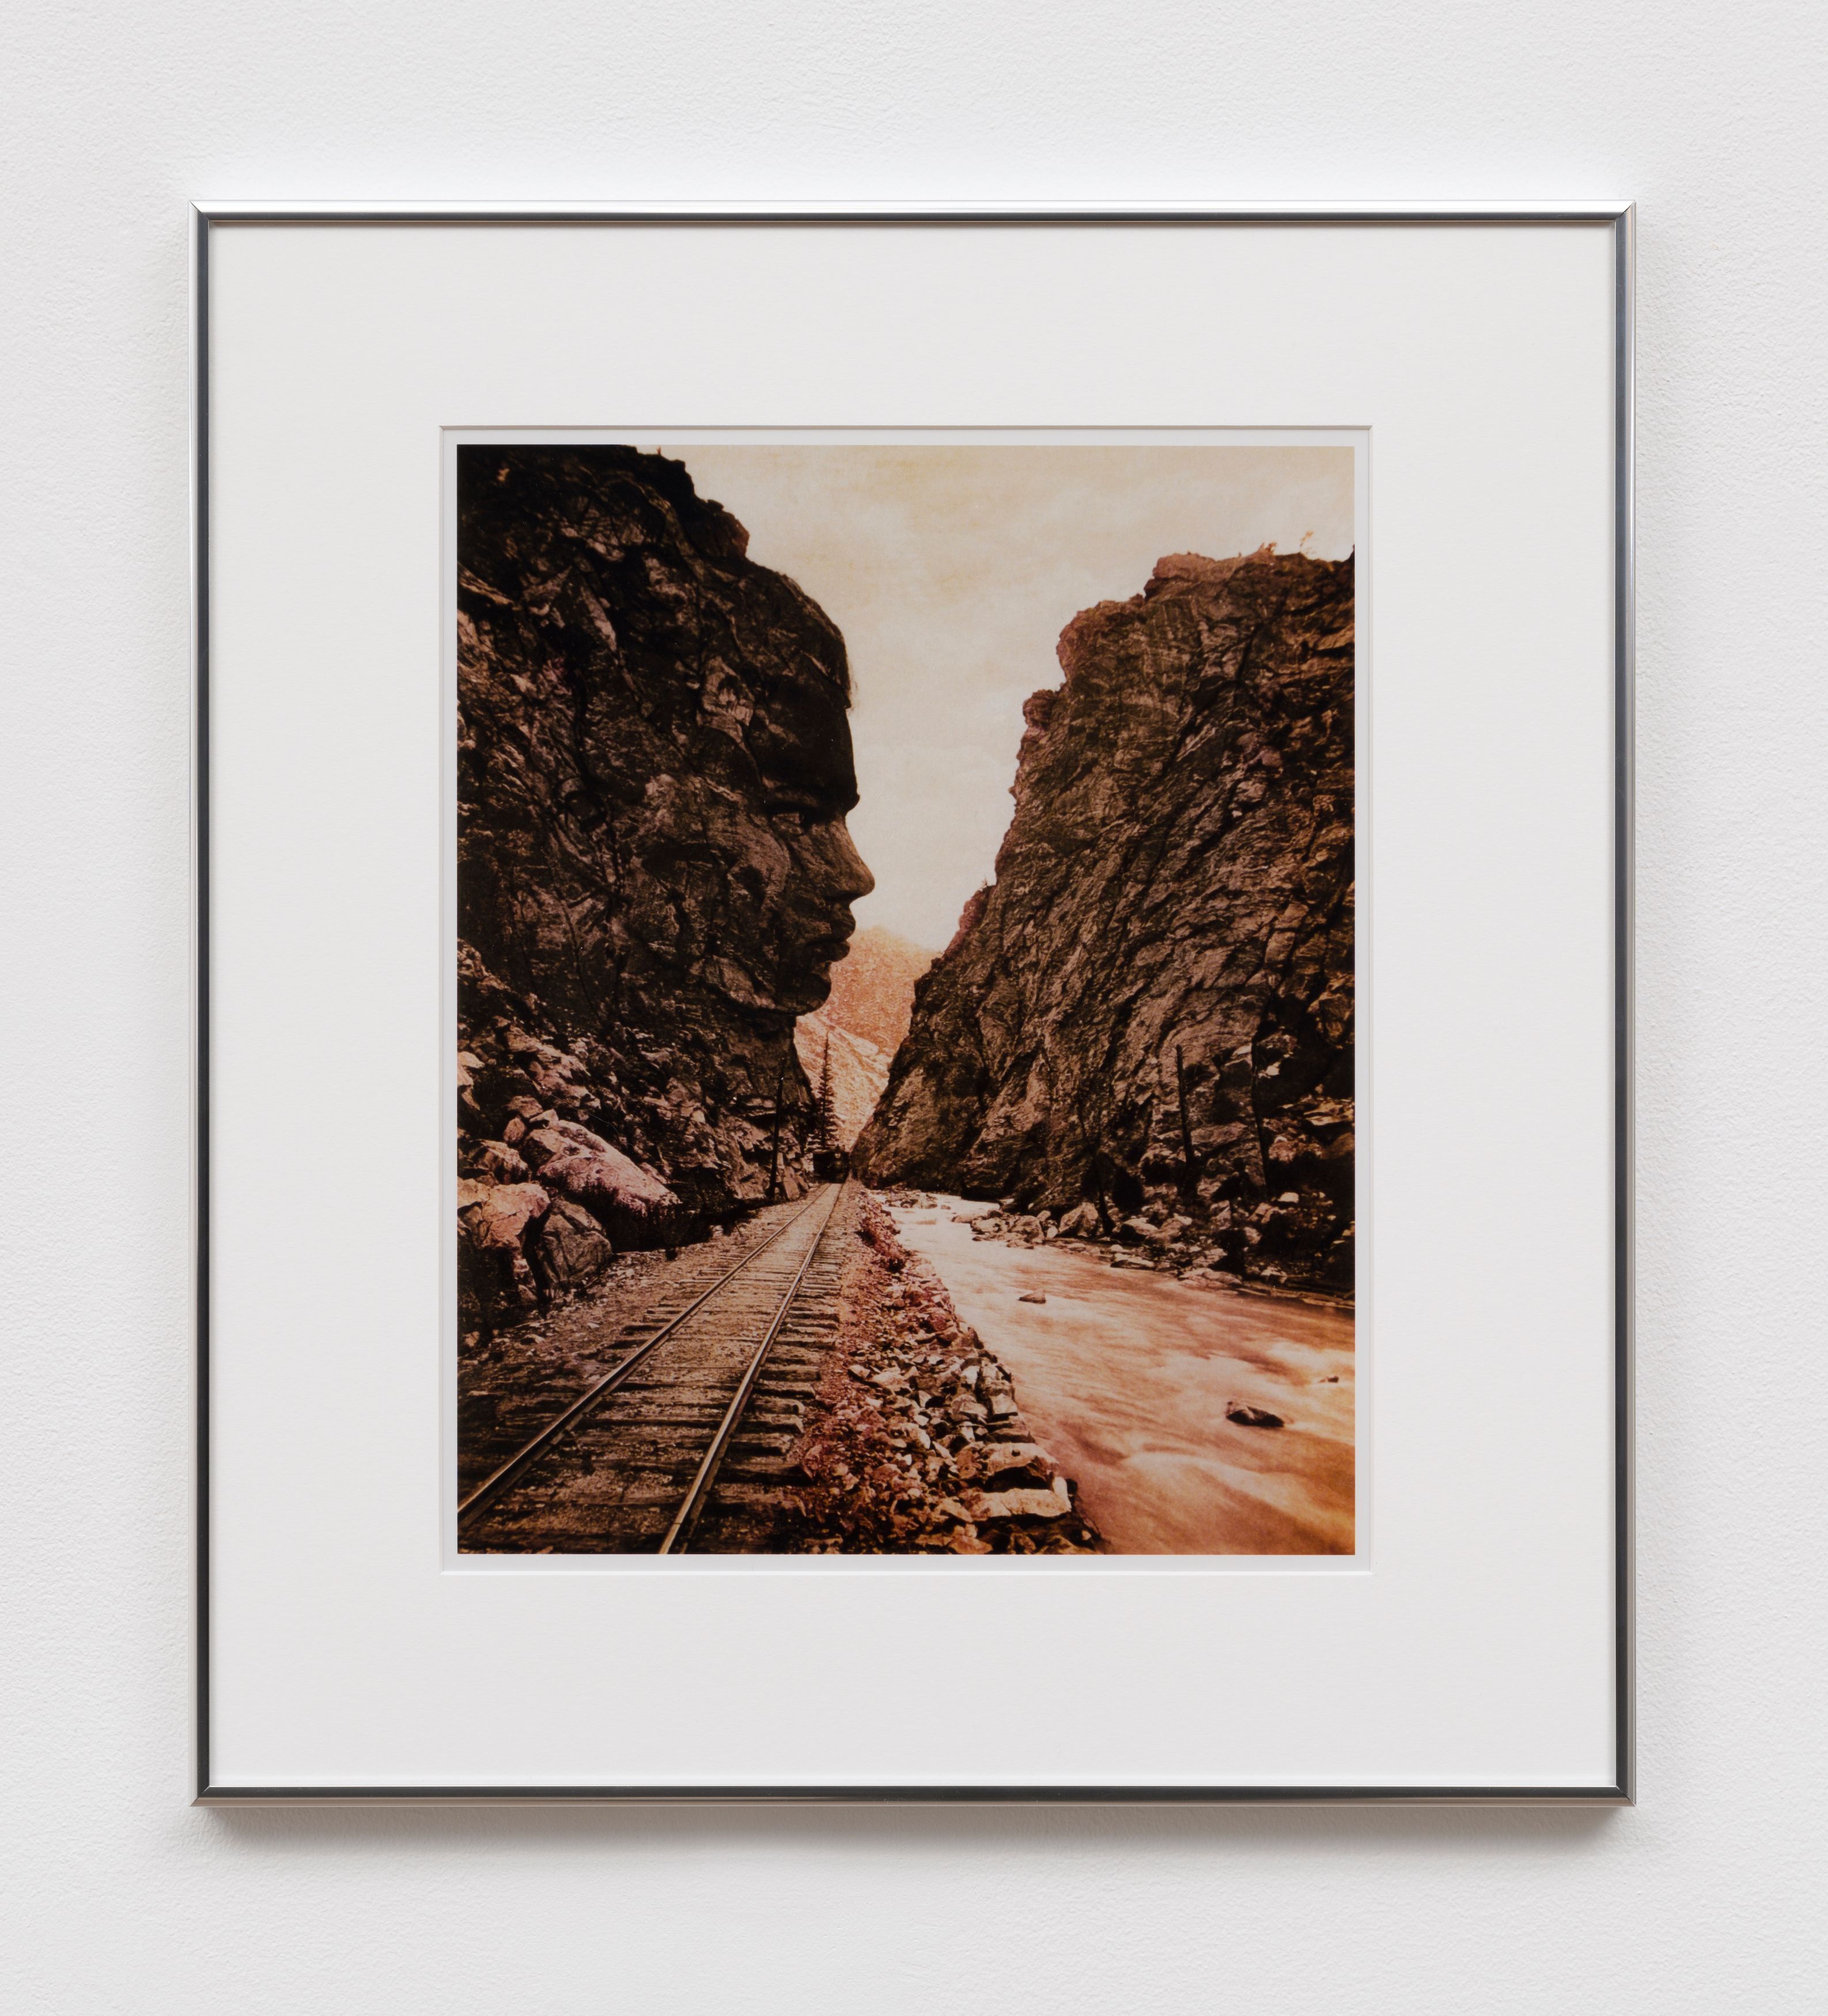 Erin Calla Watson, Clear Creek Canyon above the Forks, 2023, chromogenic print, 14 x 11 9/16 in. (35.56 x 29.39 cm) (image size), 18 x 20 in. (45.72 x 50.08 cm) (framed size), edition of 3 with 2 AP